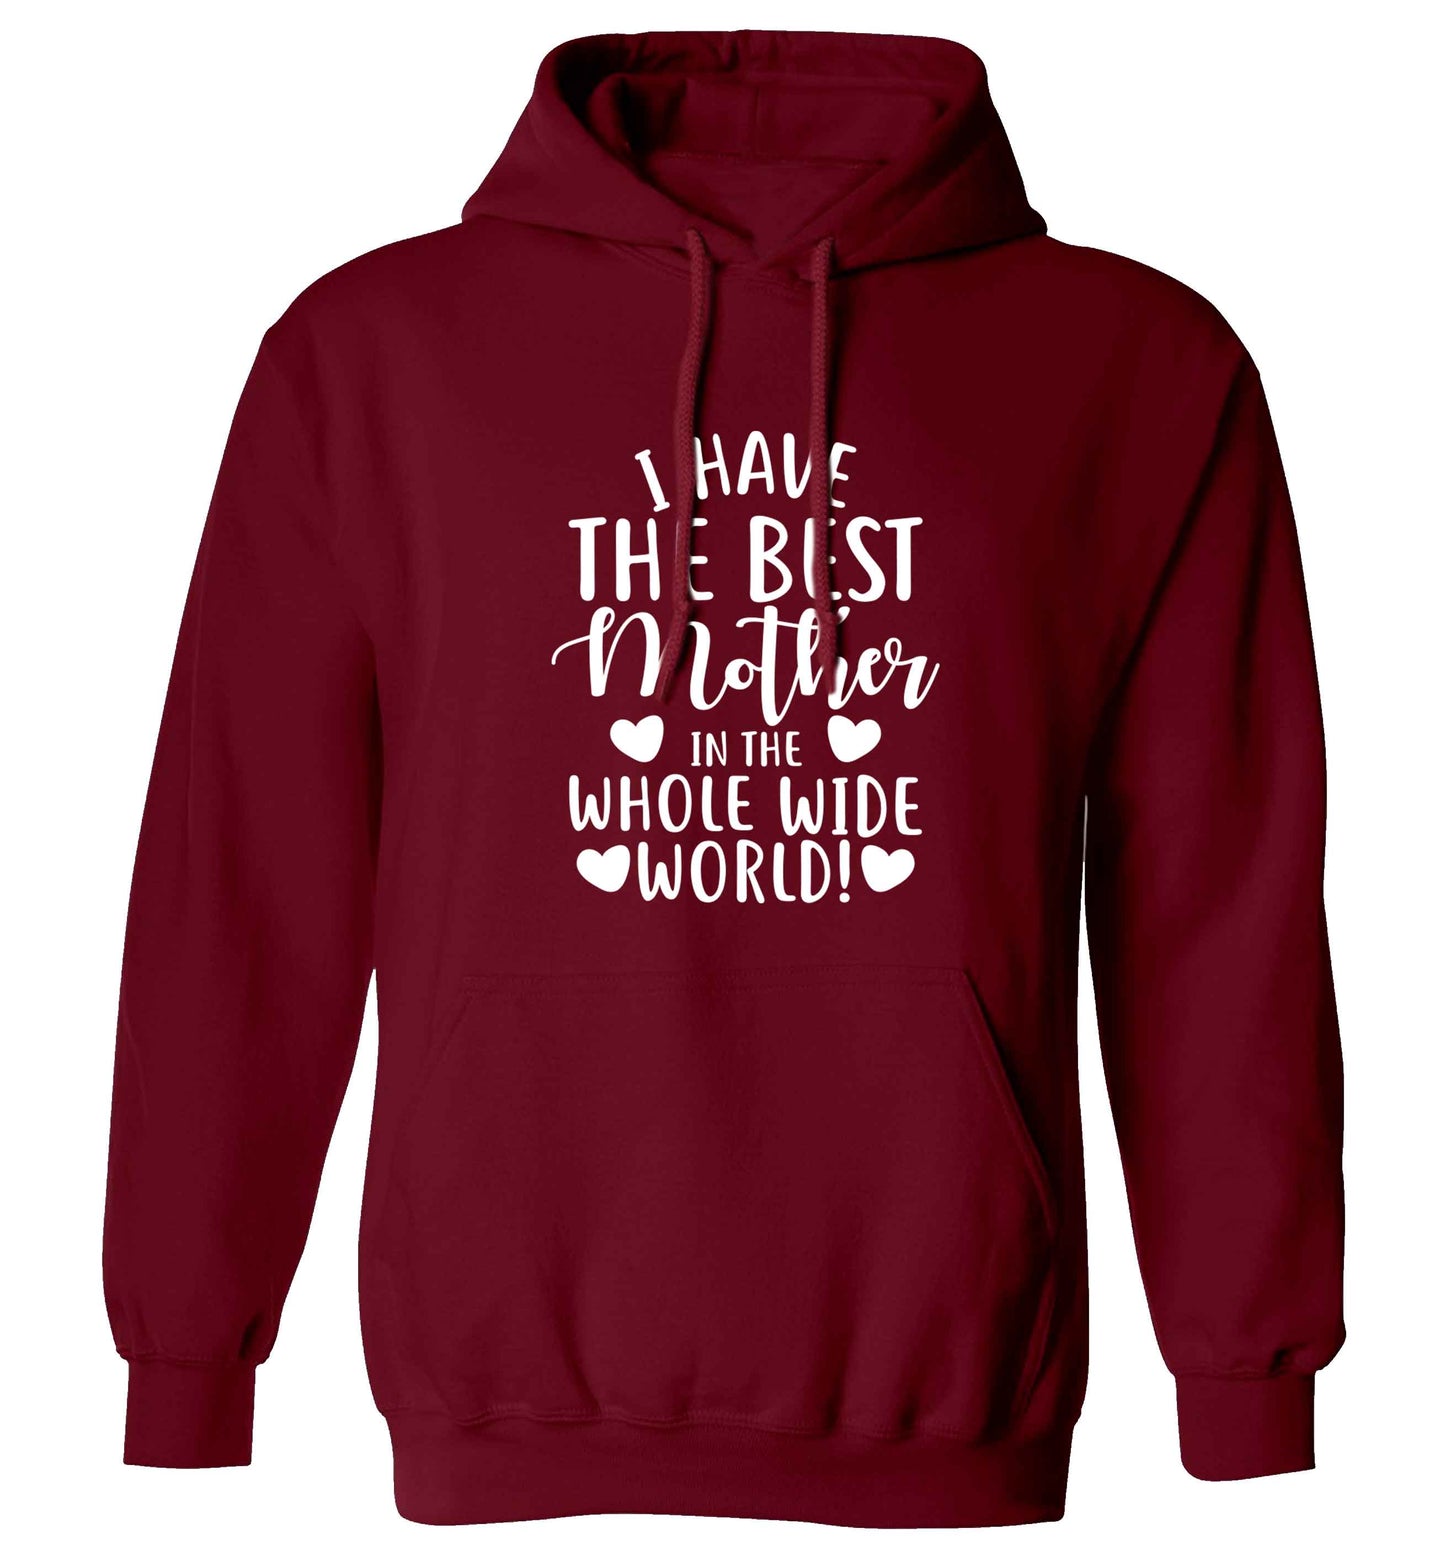 I have the best mother in the whole wide world adults unisex maroon hoodie 2XL